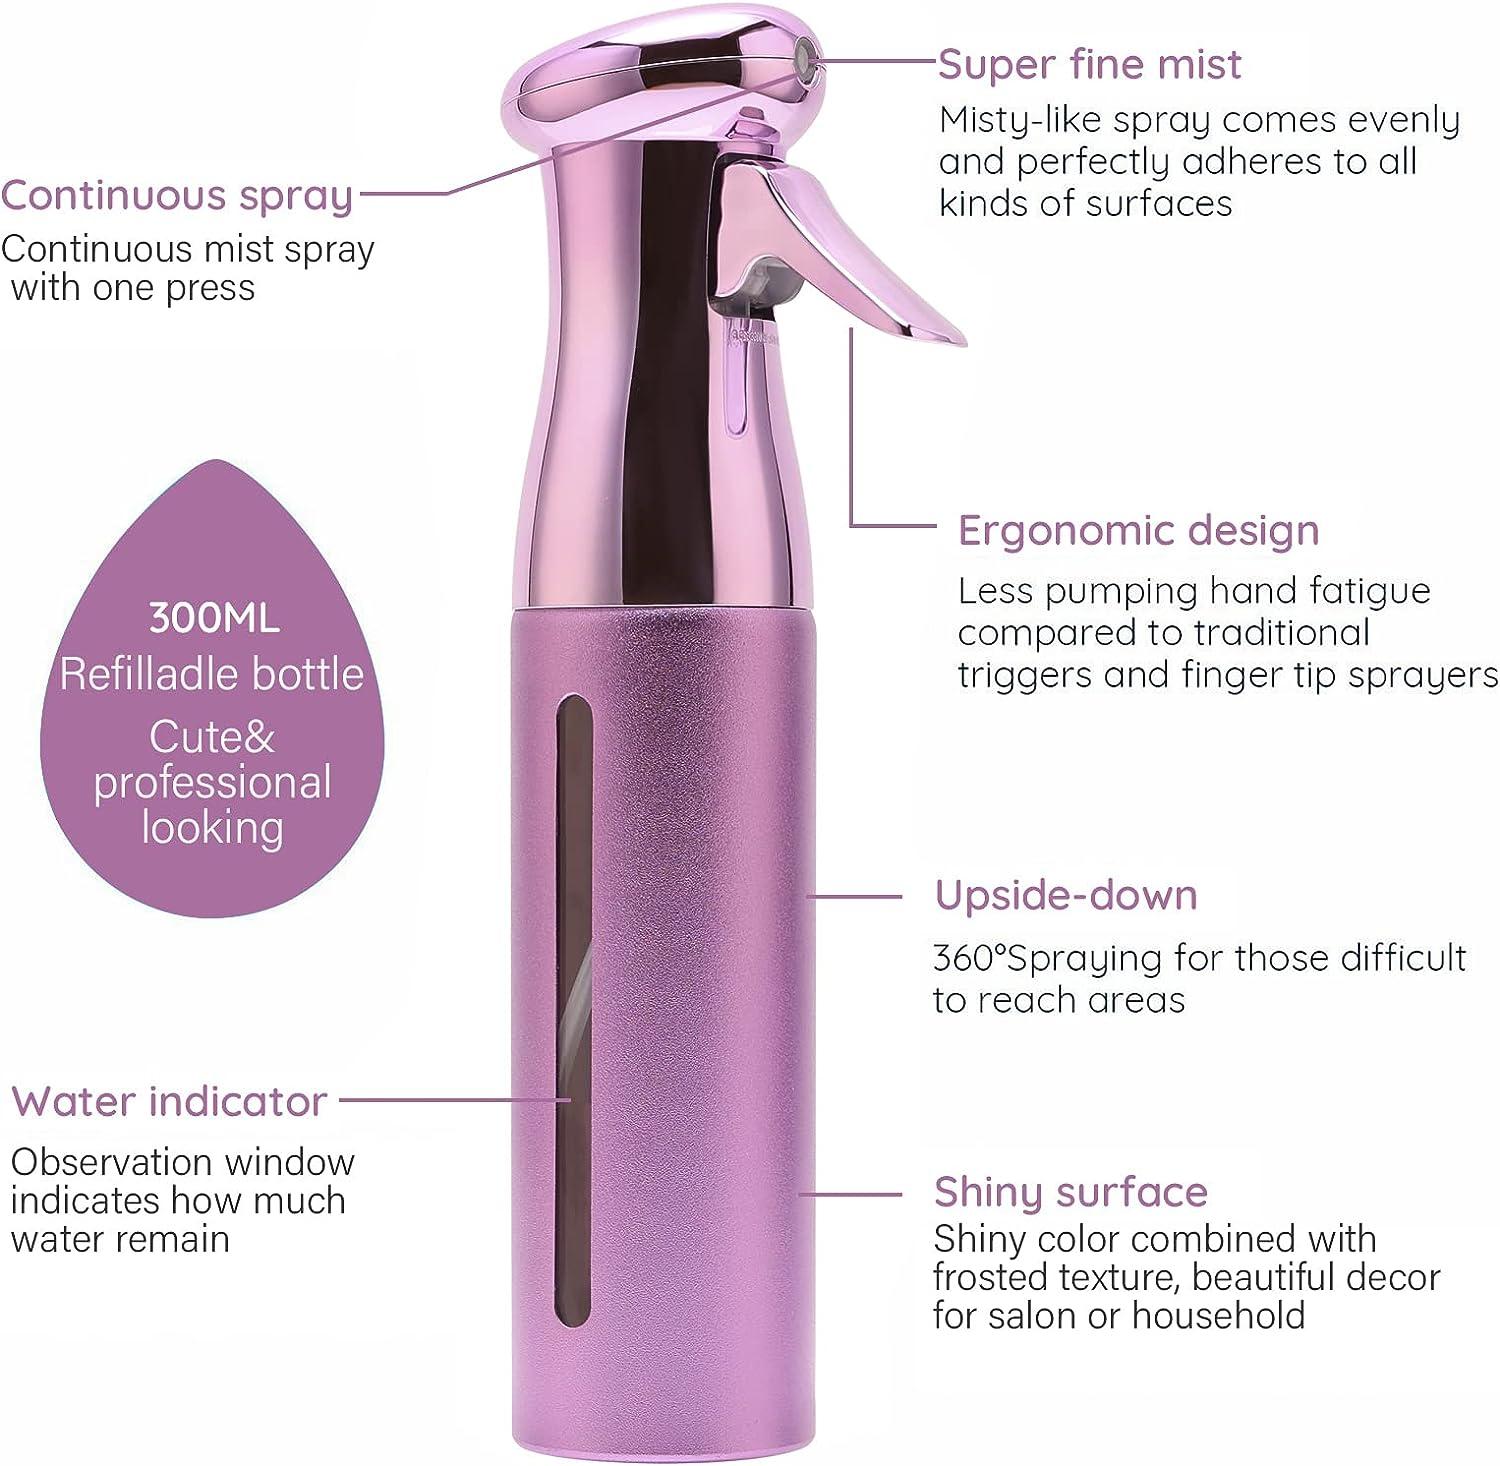 This Continuous Spray Bottle Evenly Mists Hair and Plants, and